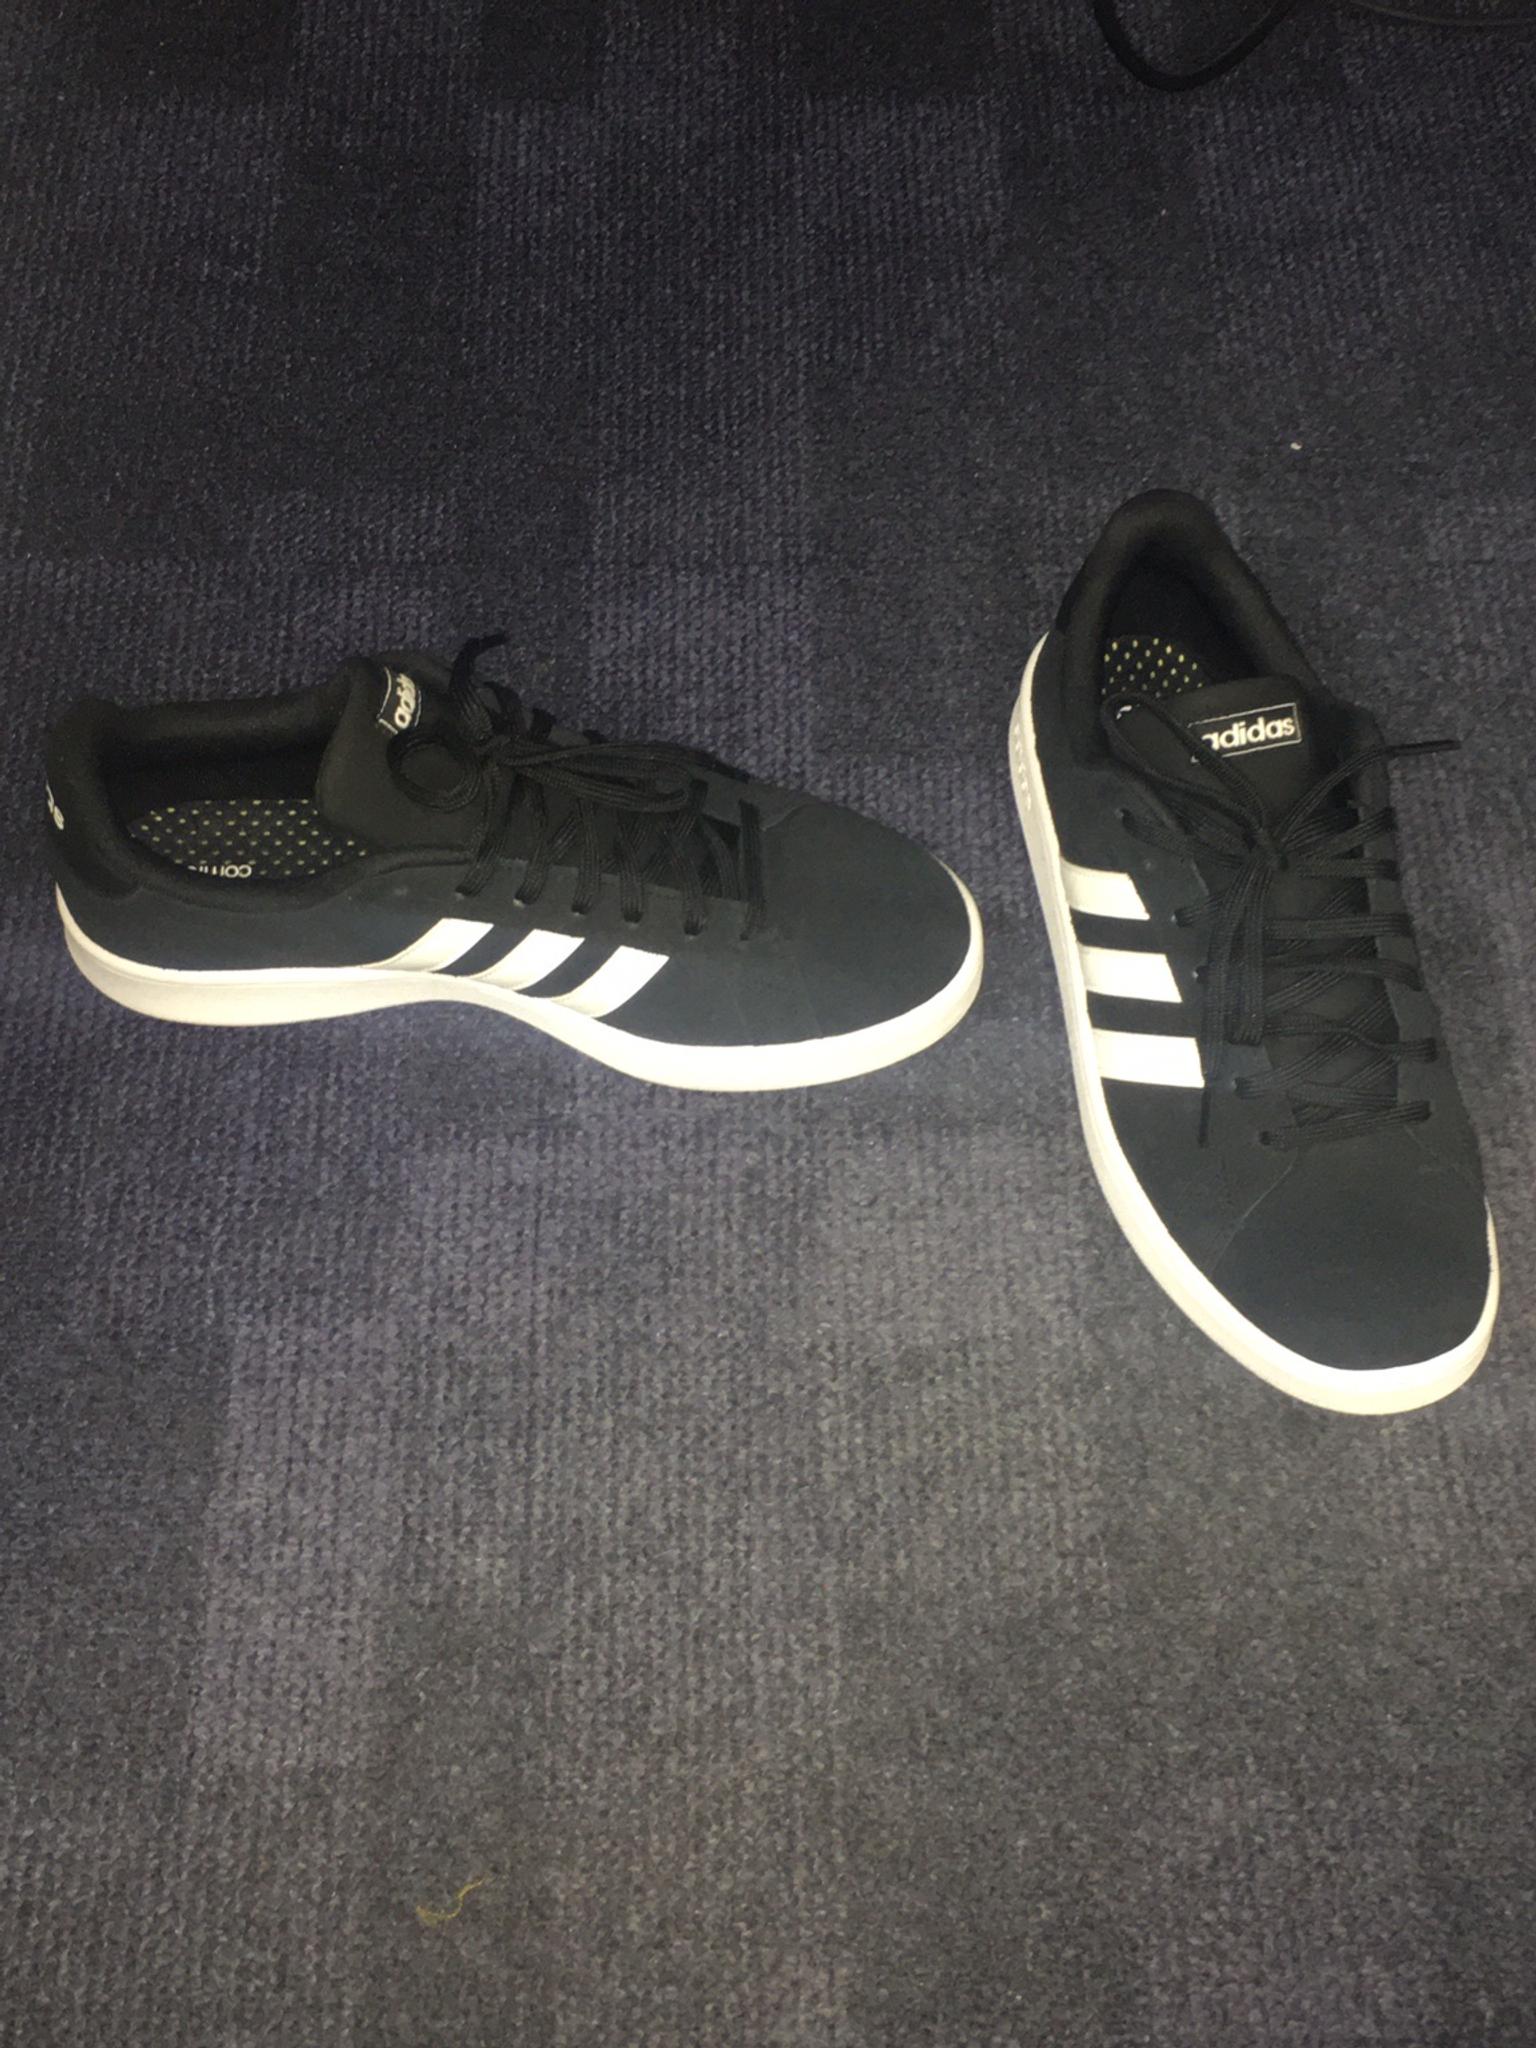 adidas trainers size 9